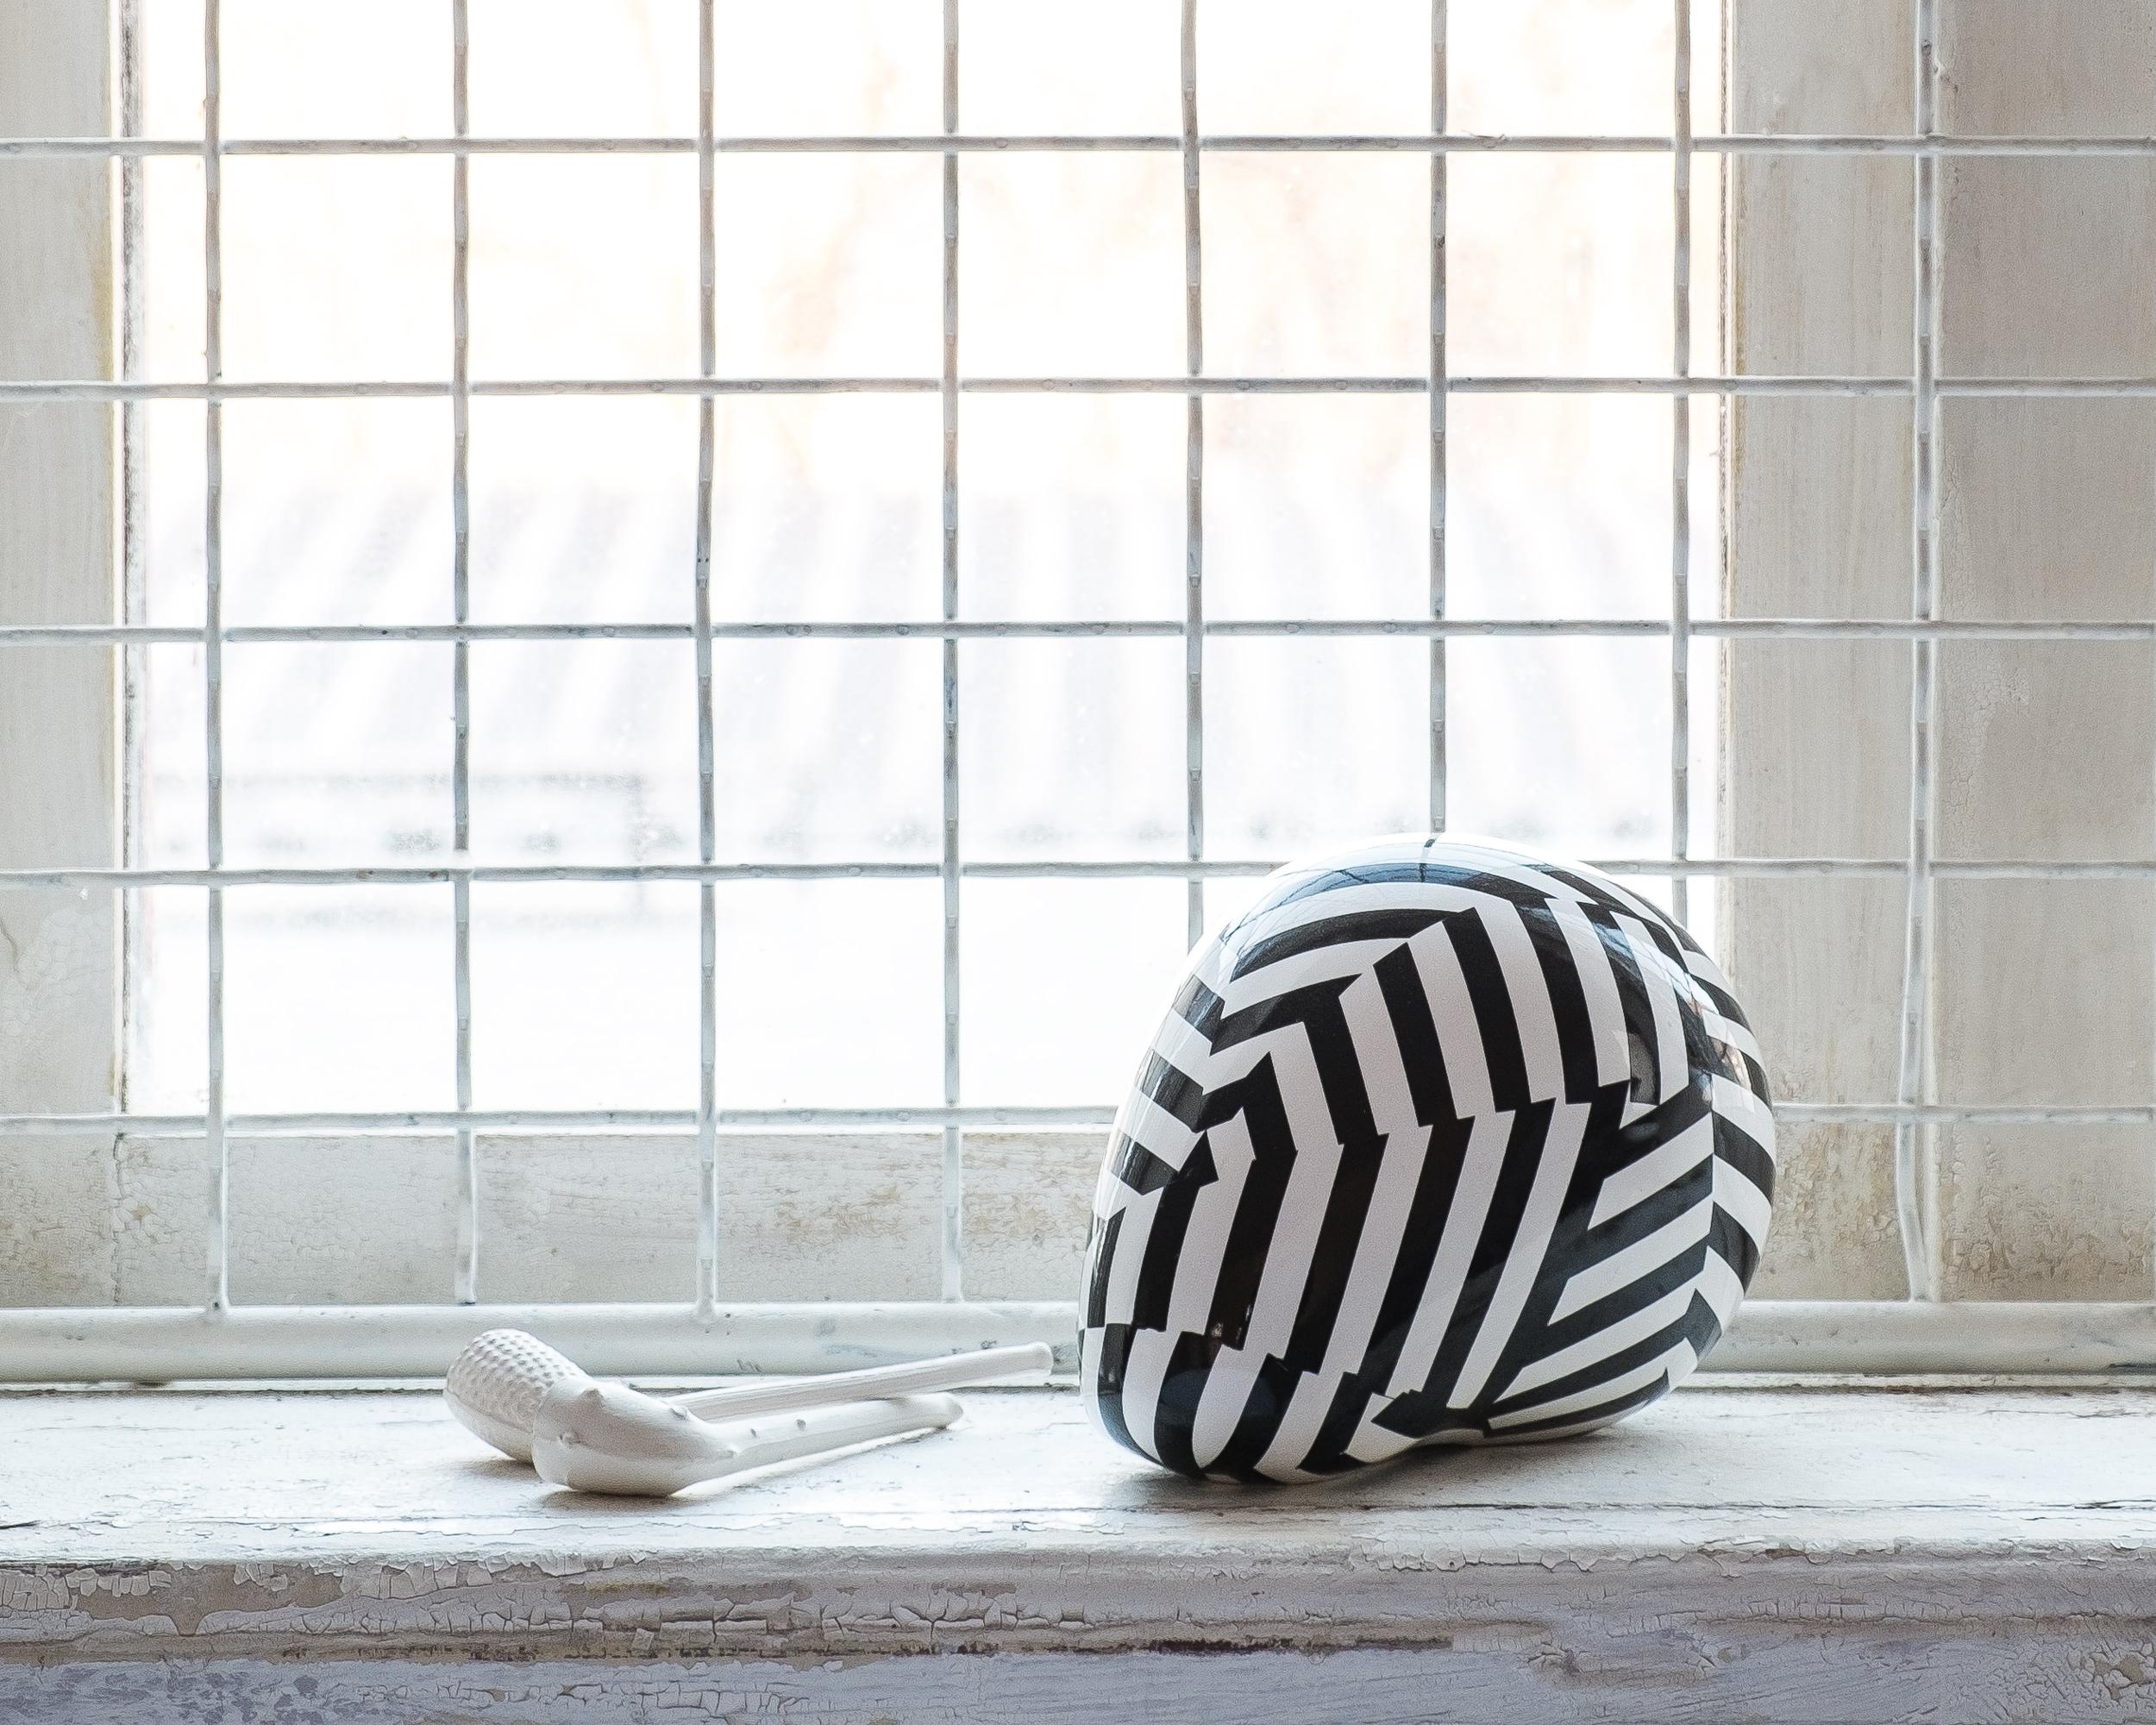 A shiny white and black porcelain figurine/sculpture titled Black Stripe is a human skull redefined as a simplistic industrial form with in-glazed imagery of dazzle camouflage hiding its true nature. Modeled in CAD, 3d printed, and then cast in